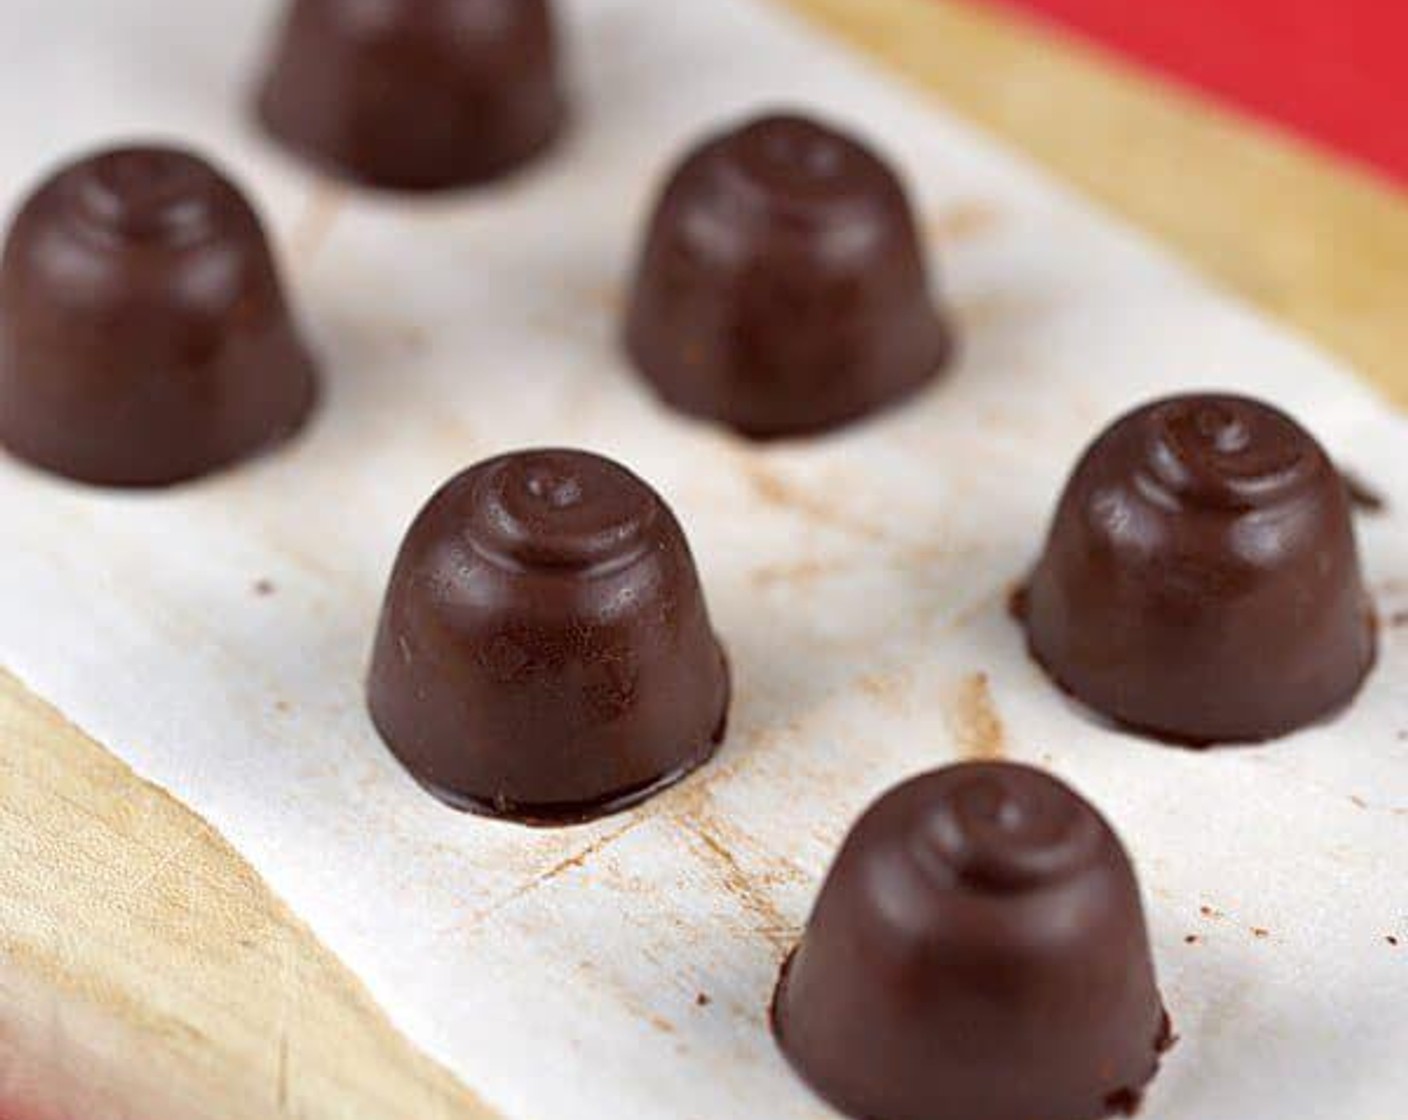 Peanut Butter and Jelly Chocolate Candies